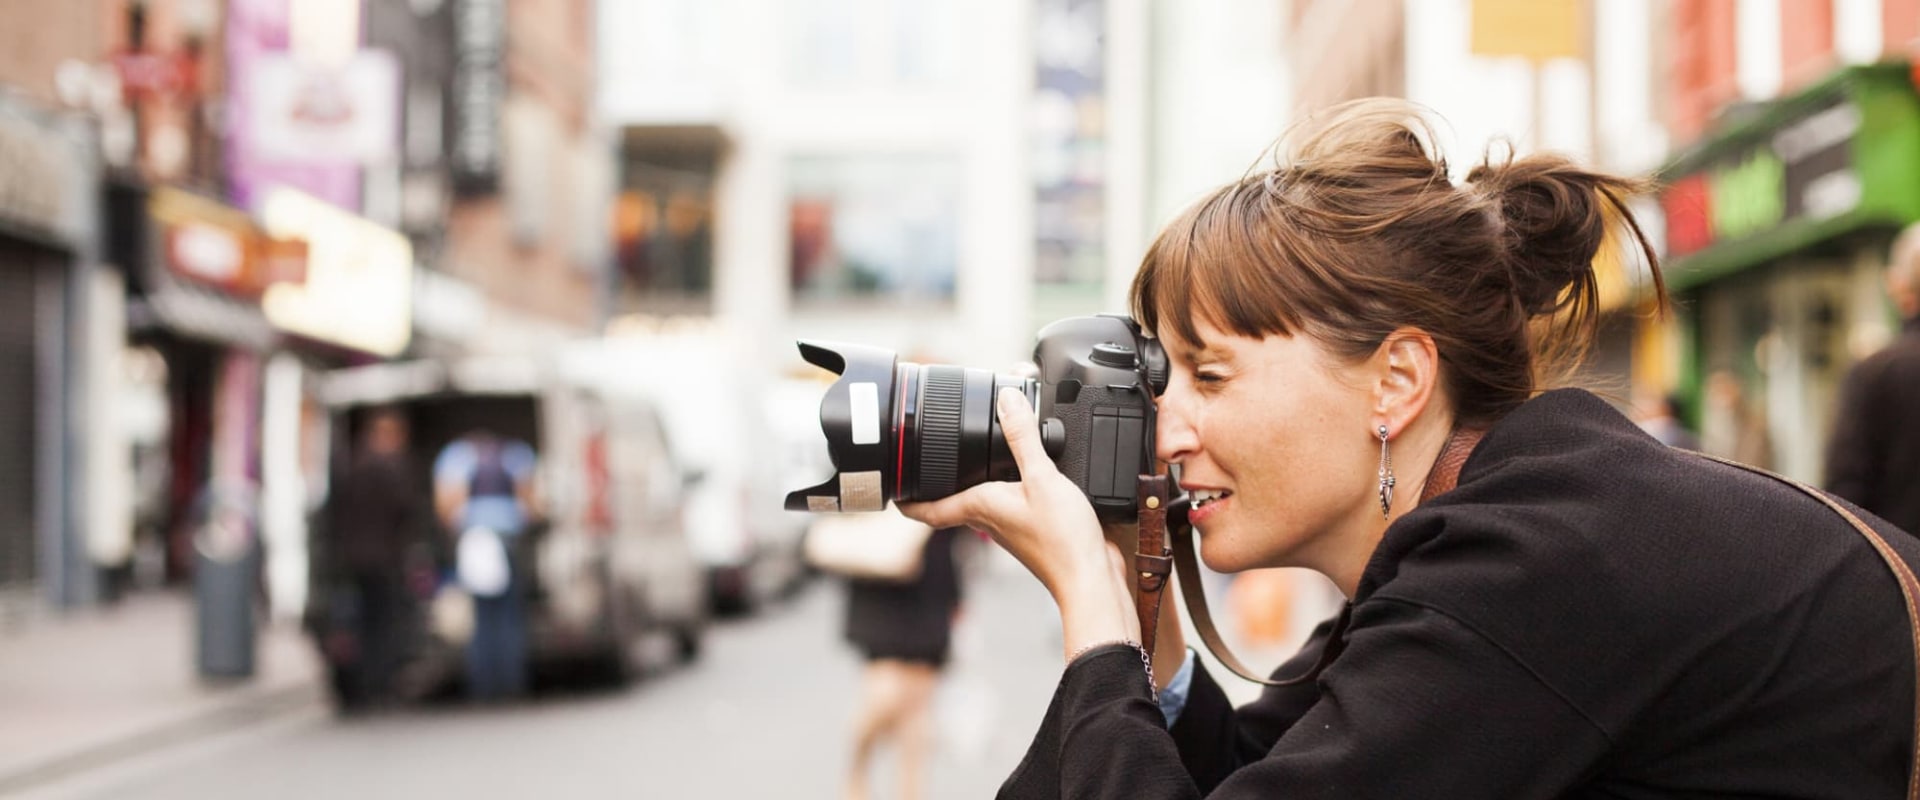 How to Prepare Ahead of Time for Photography Classes or Workshops